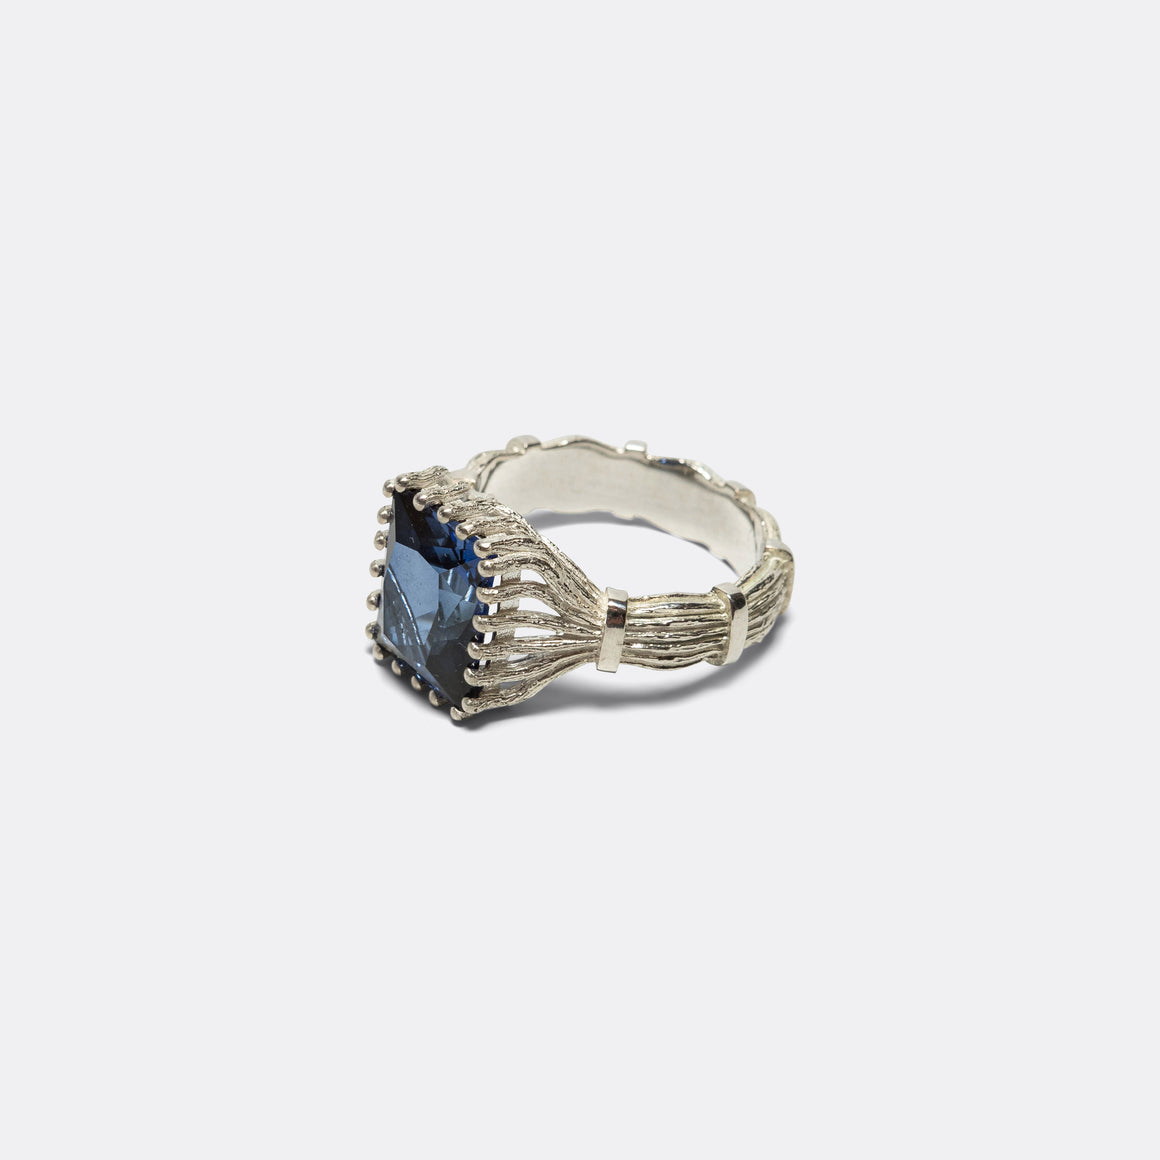 Baguette Cut Bound Willow Ring - 925 Silver/Blue Sapphire